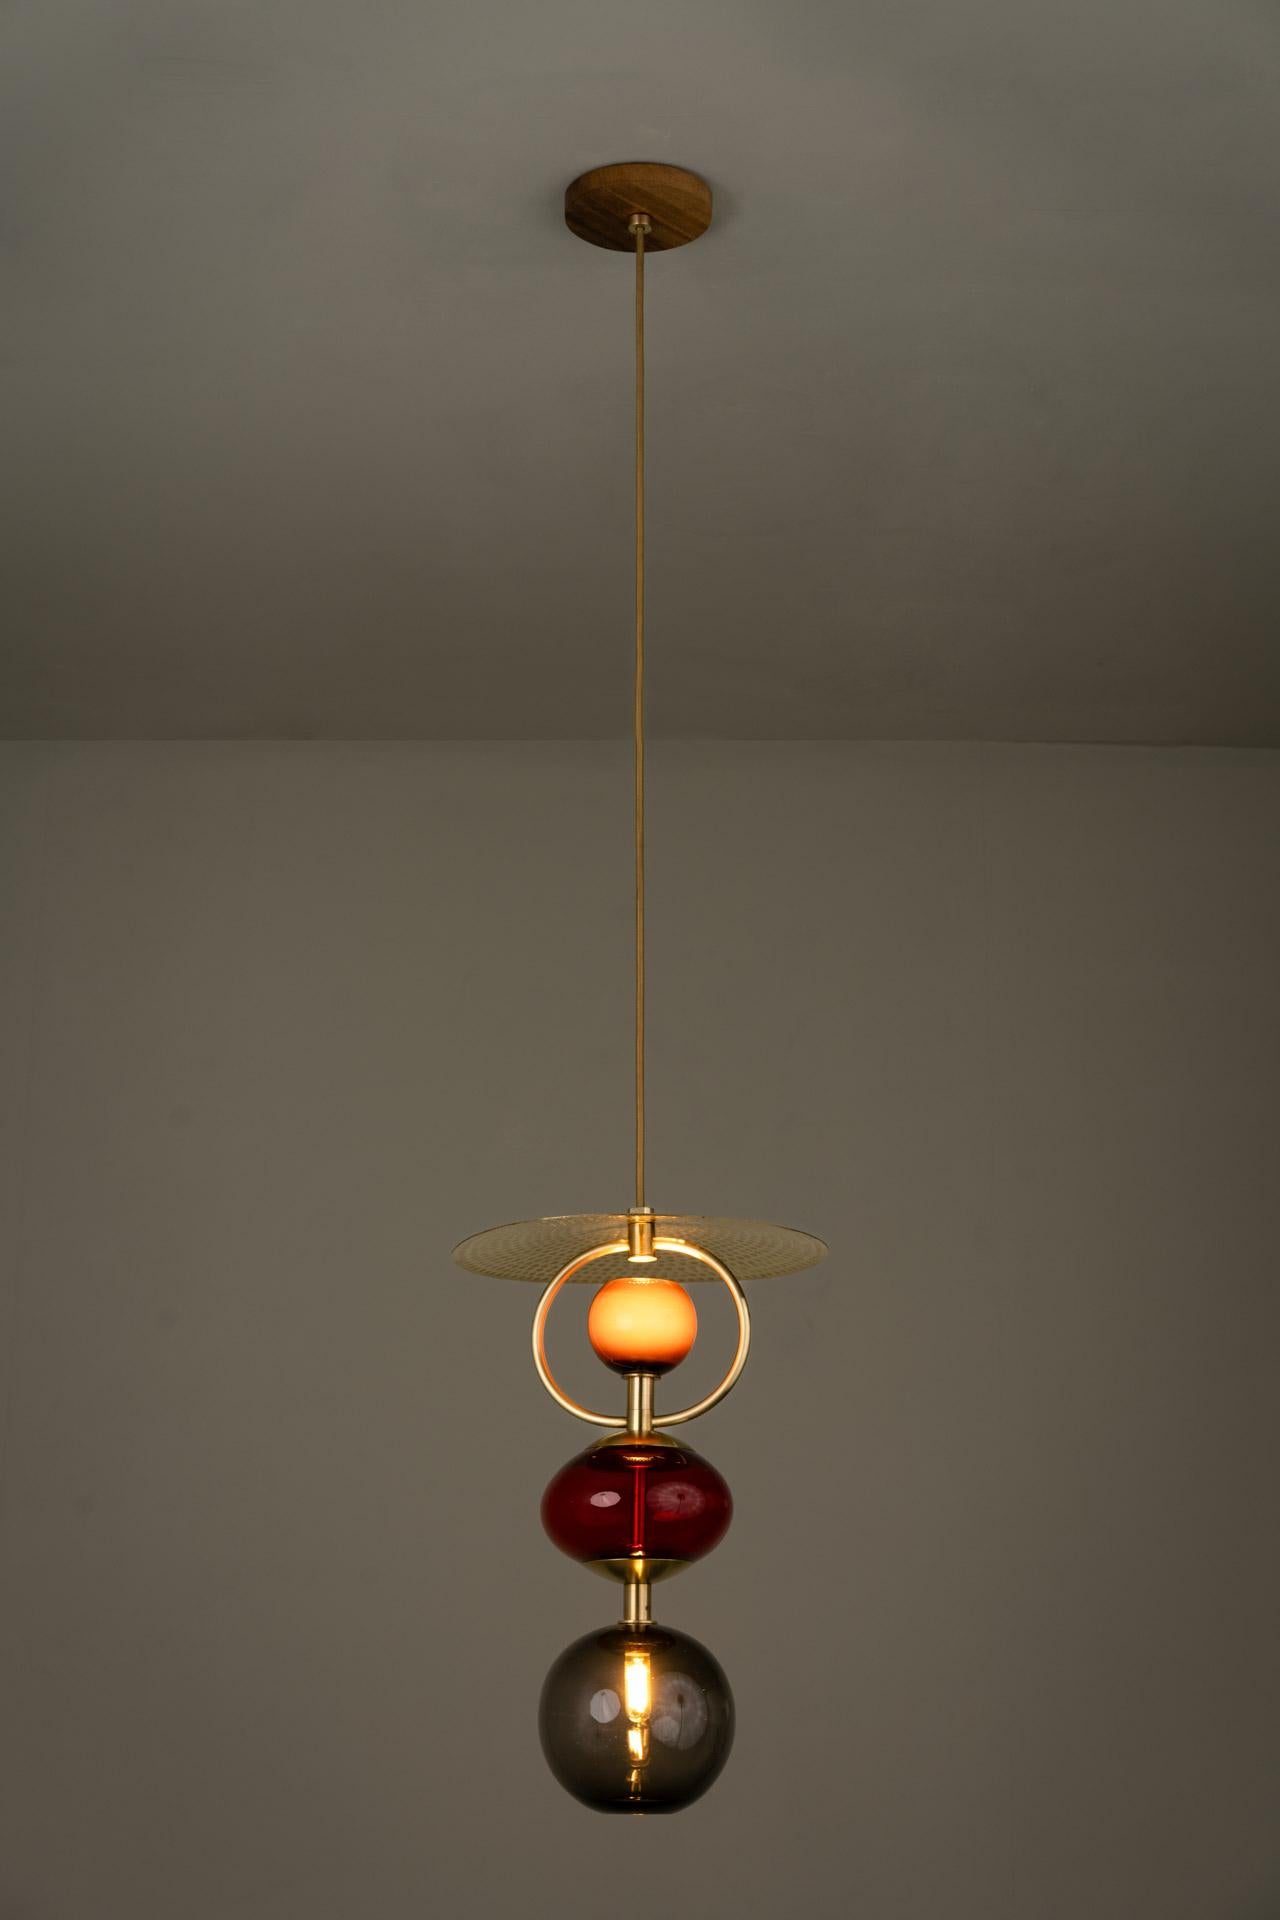 VITRA RED pendant light was designed for the Atomic collection by Mexican artist Isabel Moncada.

The fascination produced by the light through the colors of the glass, the curved silhouette, and the hand-forged brass are the elements that come